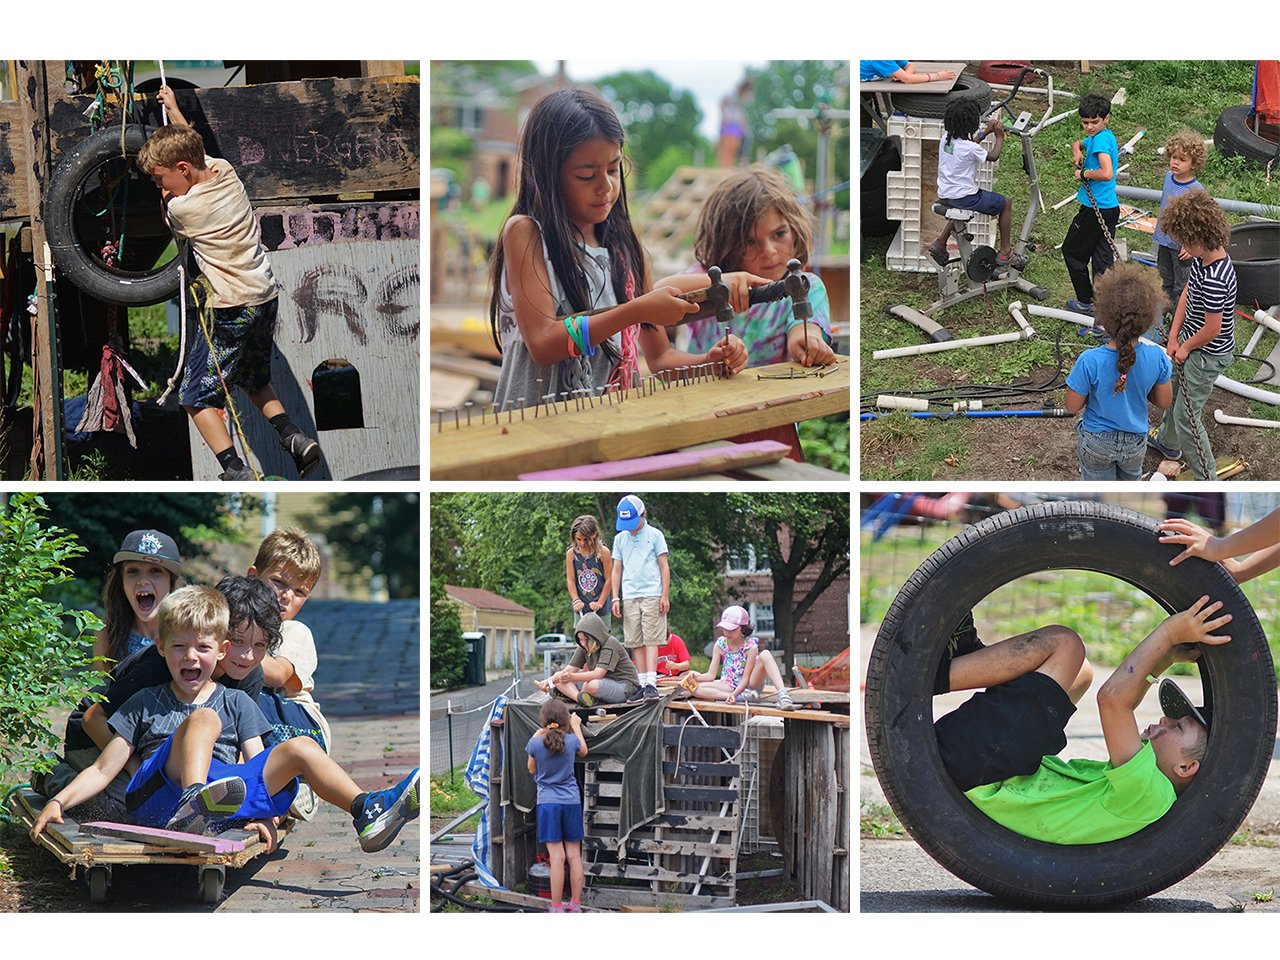 Six photos of kids playing at Play:ground on Governors Island